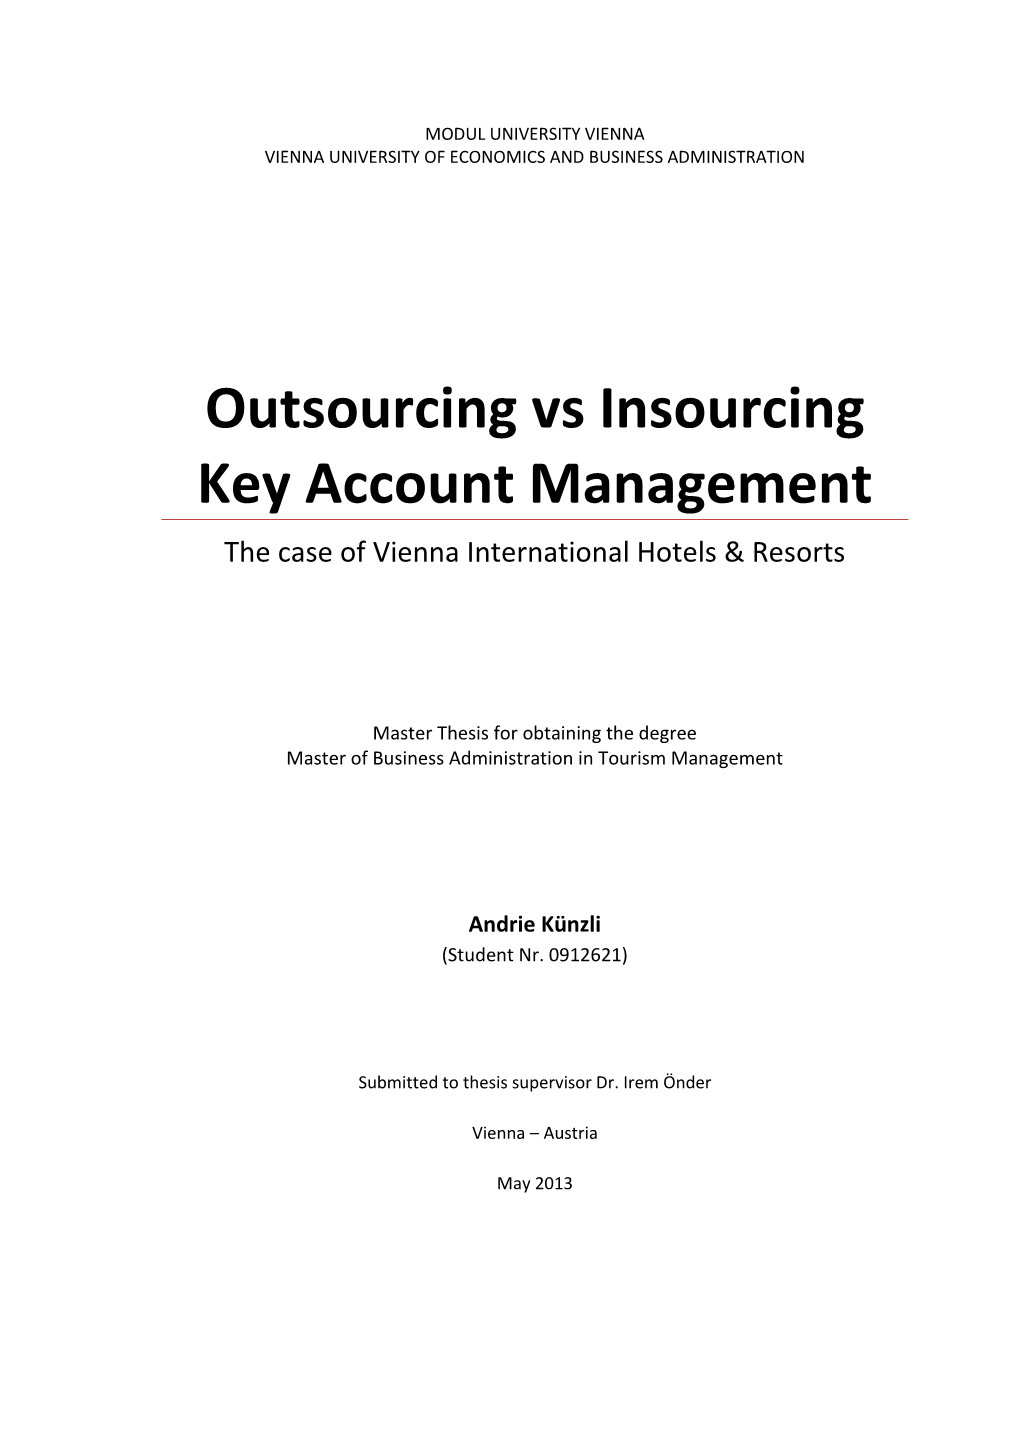 Outsourcing Vs Insourcing Key Account Management the Case of Vienna International Hotels & Resorts